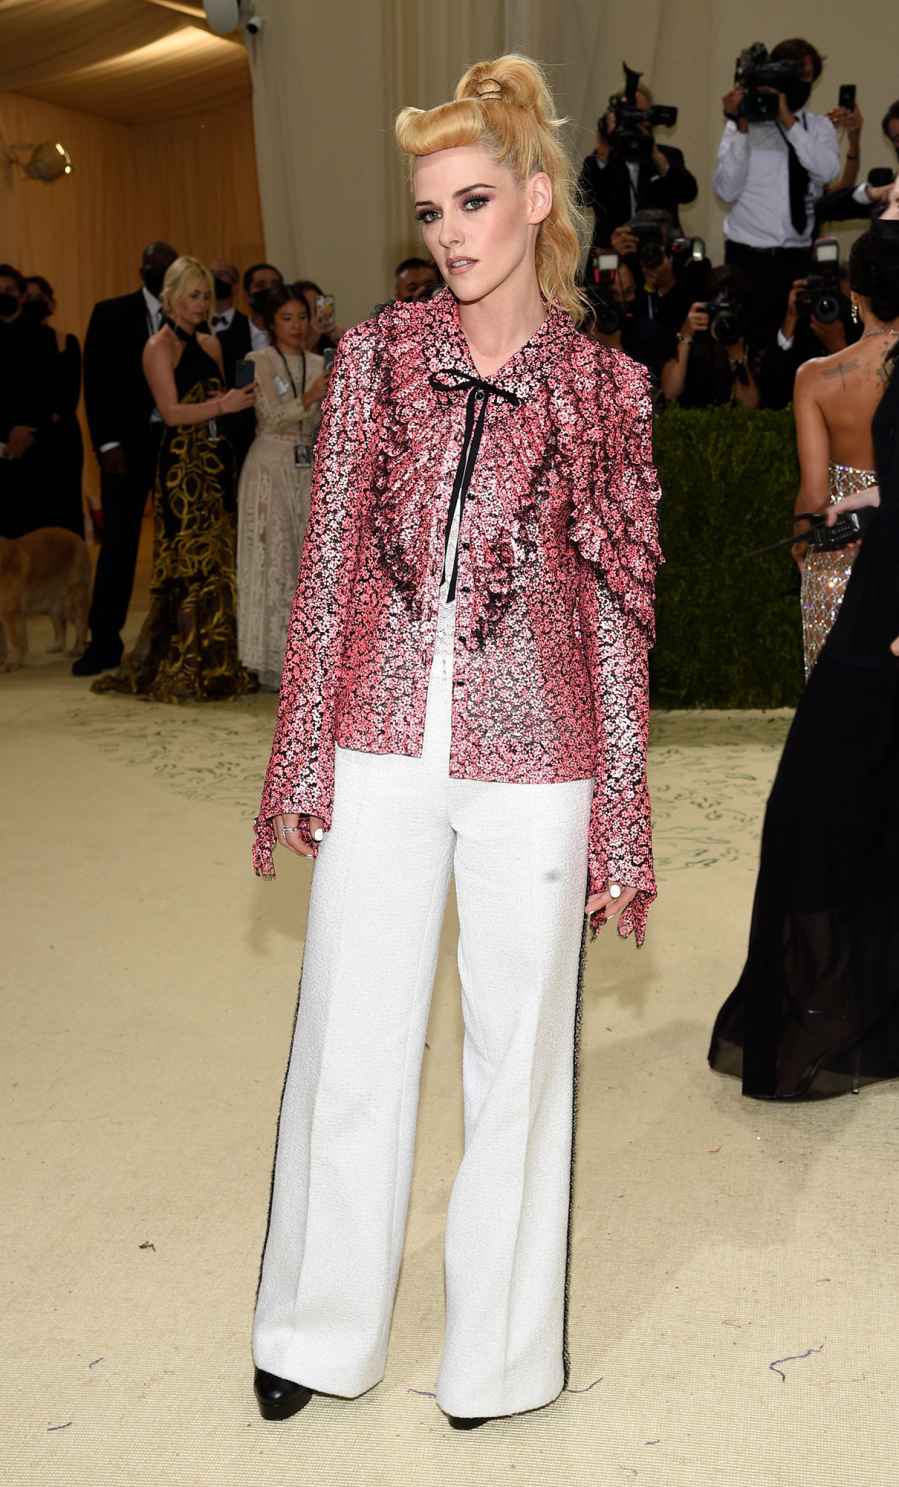 Pink! Peace Signs! Kristen Stewart Serves Up All the Retro Vibes at the 2021 Met Gala